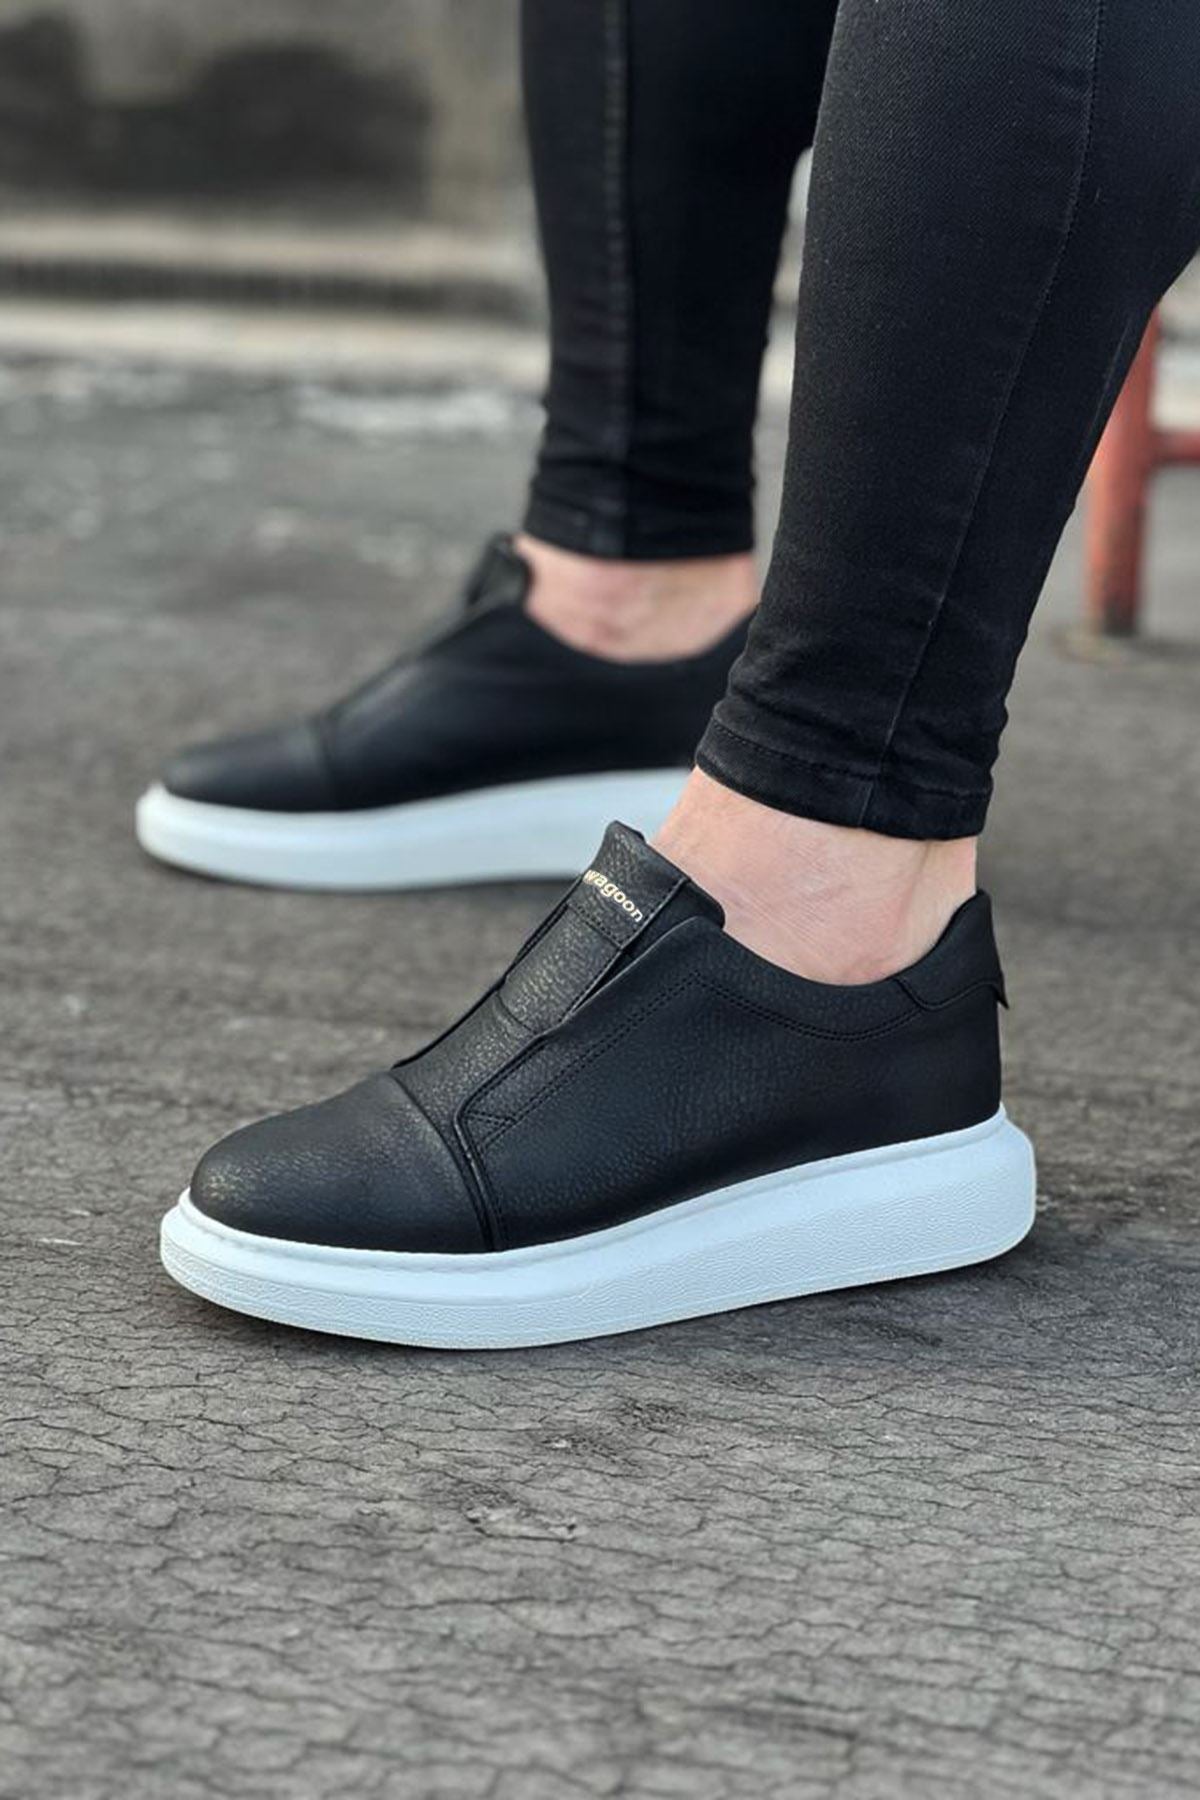 WG023 Black Daily Casual Men's Shoes